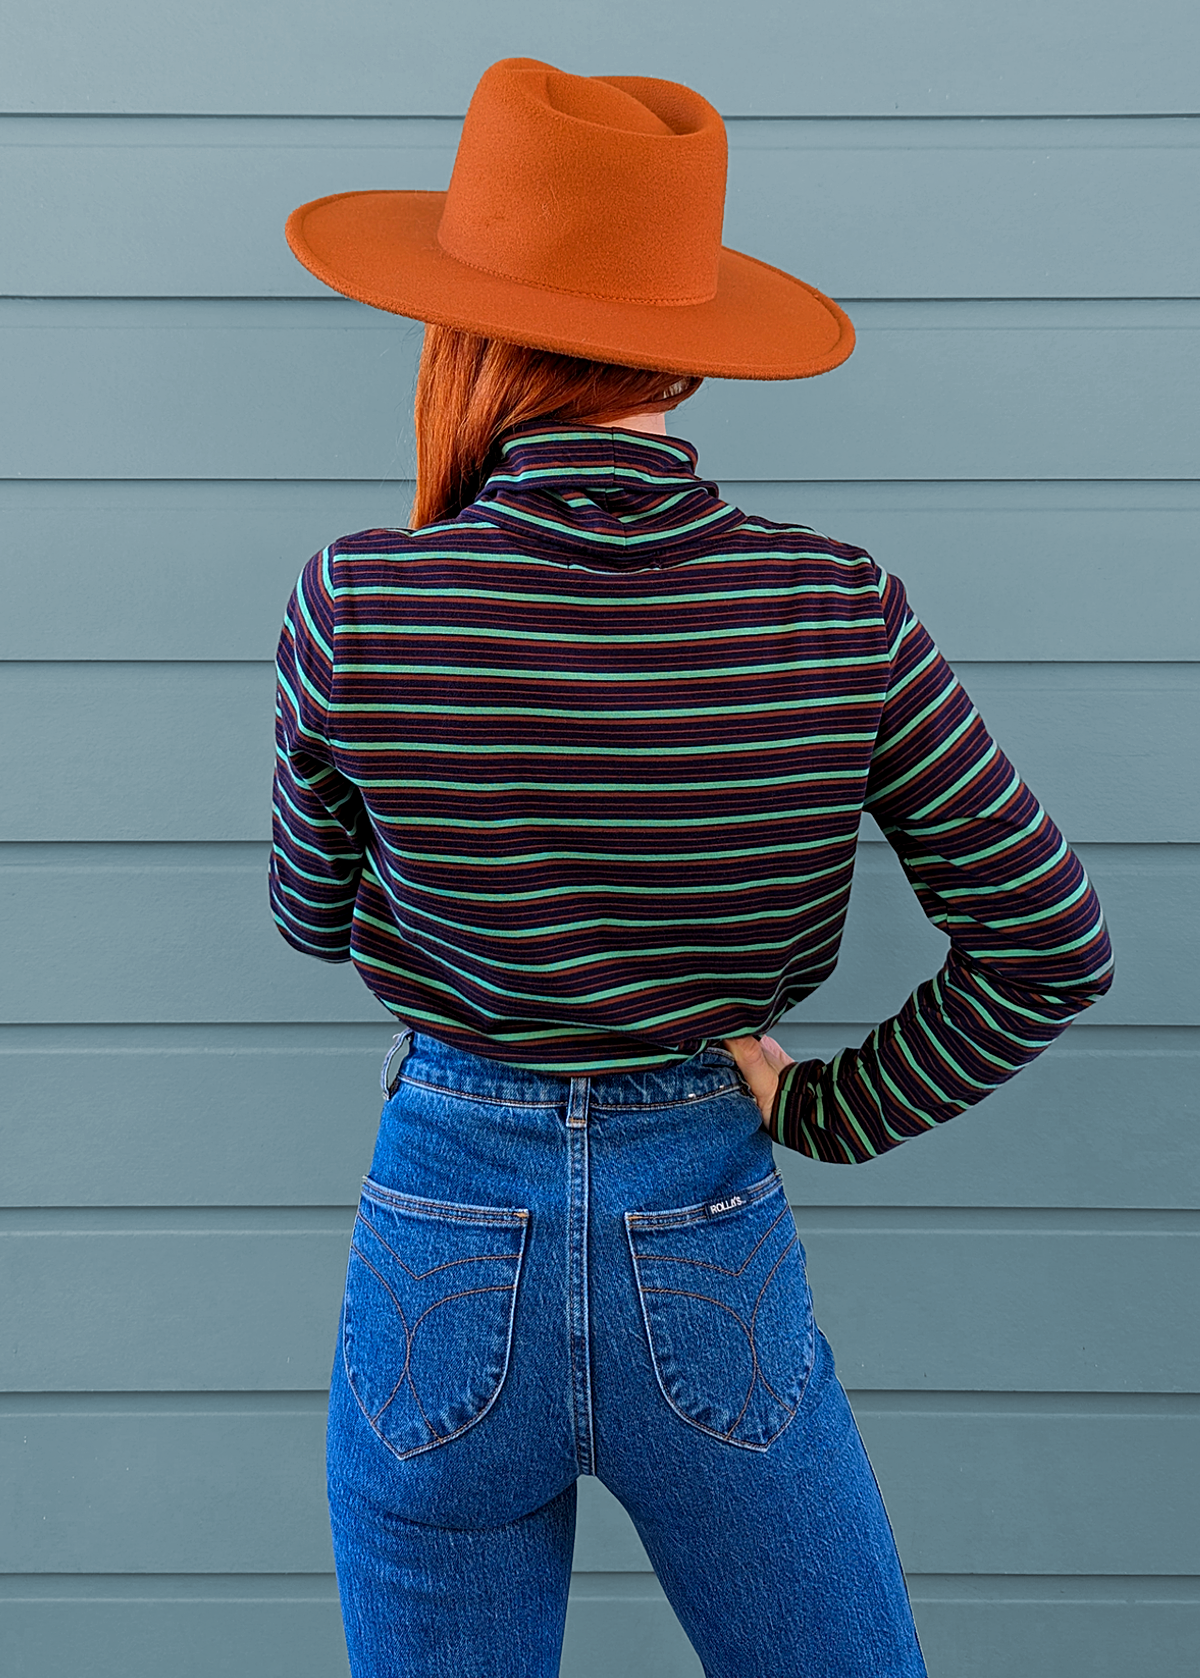 70s inspired slouchy fit long sleeve cotton turtleneck tee with brown, navy, and teal stripes, by Nice Things by Paloma S